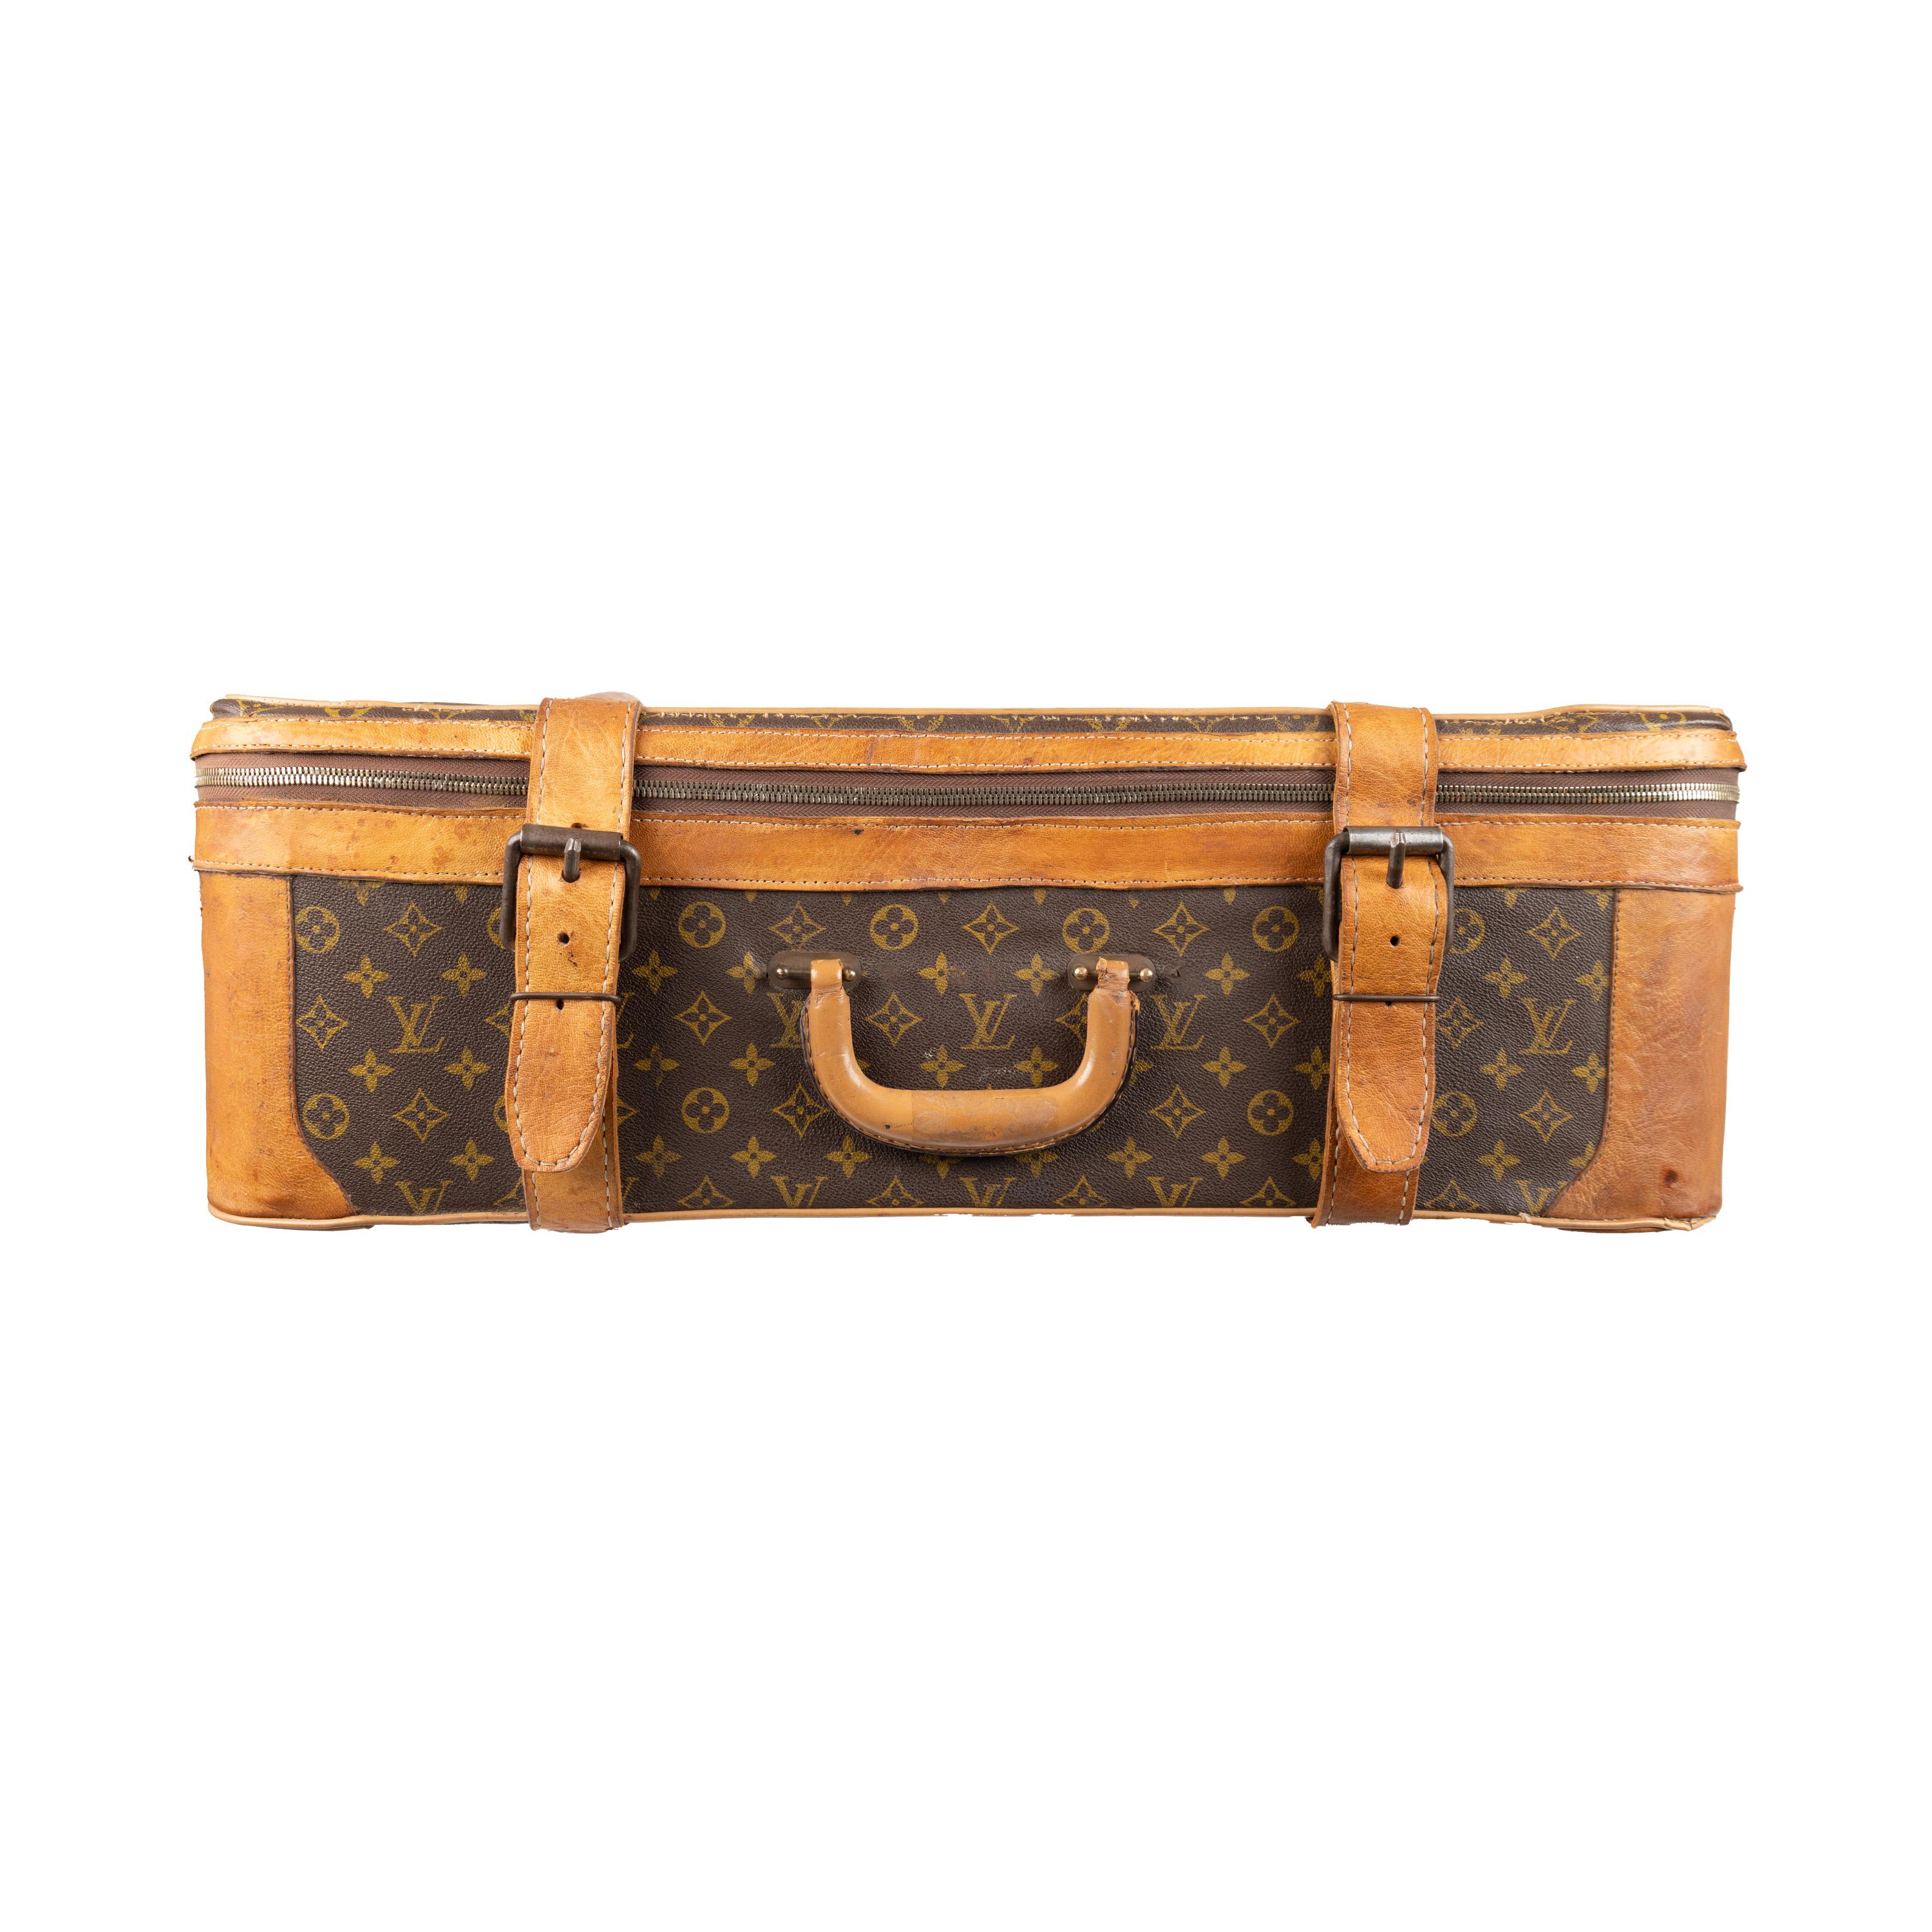 This Louis Vuitton Monogram Stratos 60 Travel Bag is an impeccable collector's piece crafted in Louis Vuitton's classic monogram coated canvas. It features reinforced top handle and brass hardware for superior durability, while its white fabric